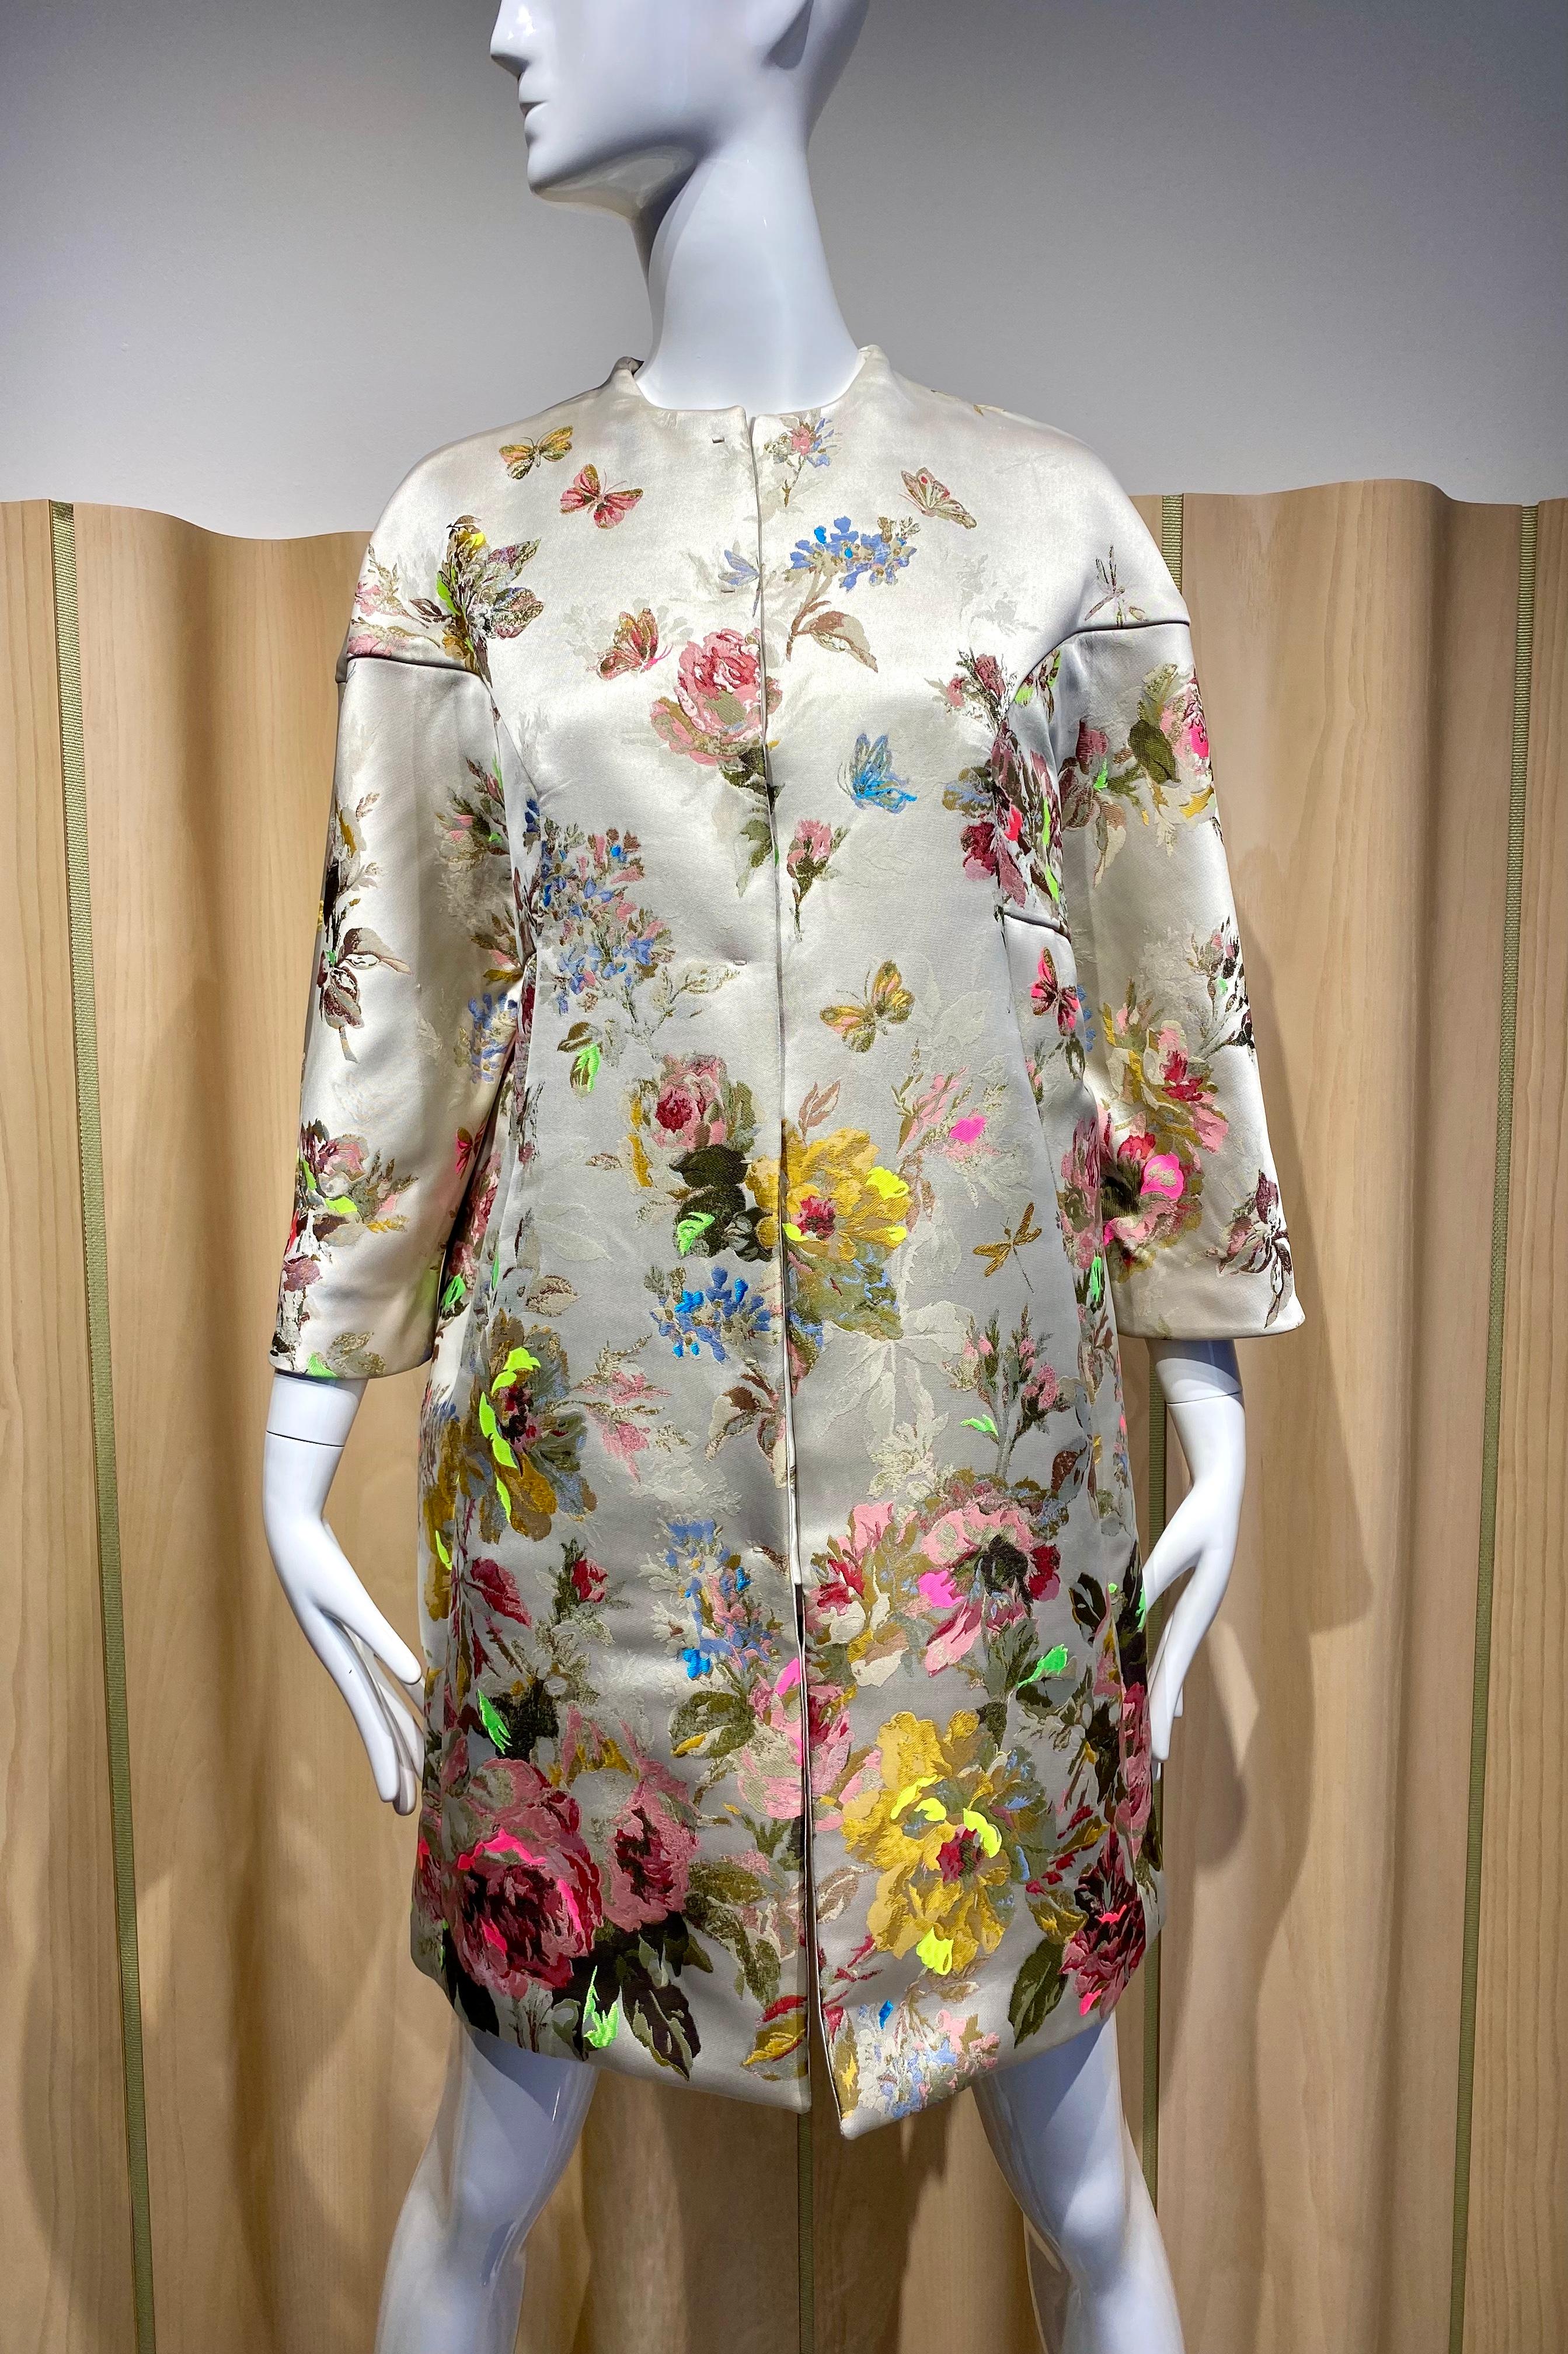 Valentino New Coat with price tag $4980. Beautiful Silver Silk Brocade coat with flower, butterfly, and Dragonfly in pink, yellow, green and acid green. Perfect for bridal or cocktail party.
-Pockets
- 3/4 sleeve. Marked size 6